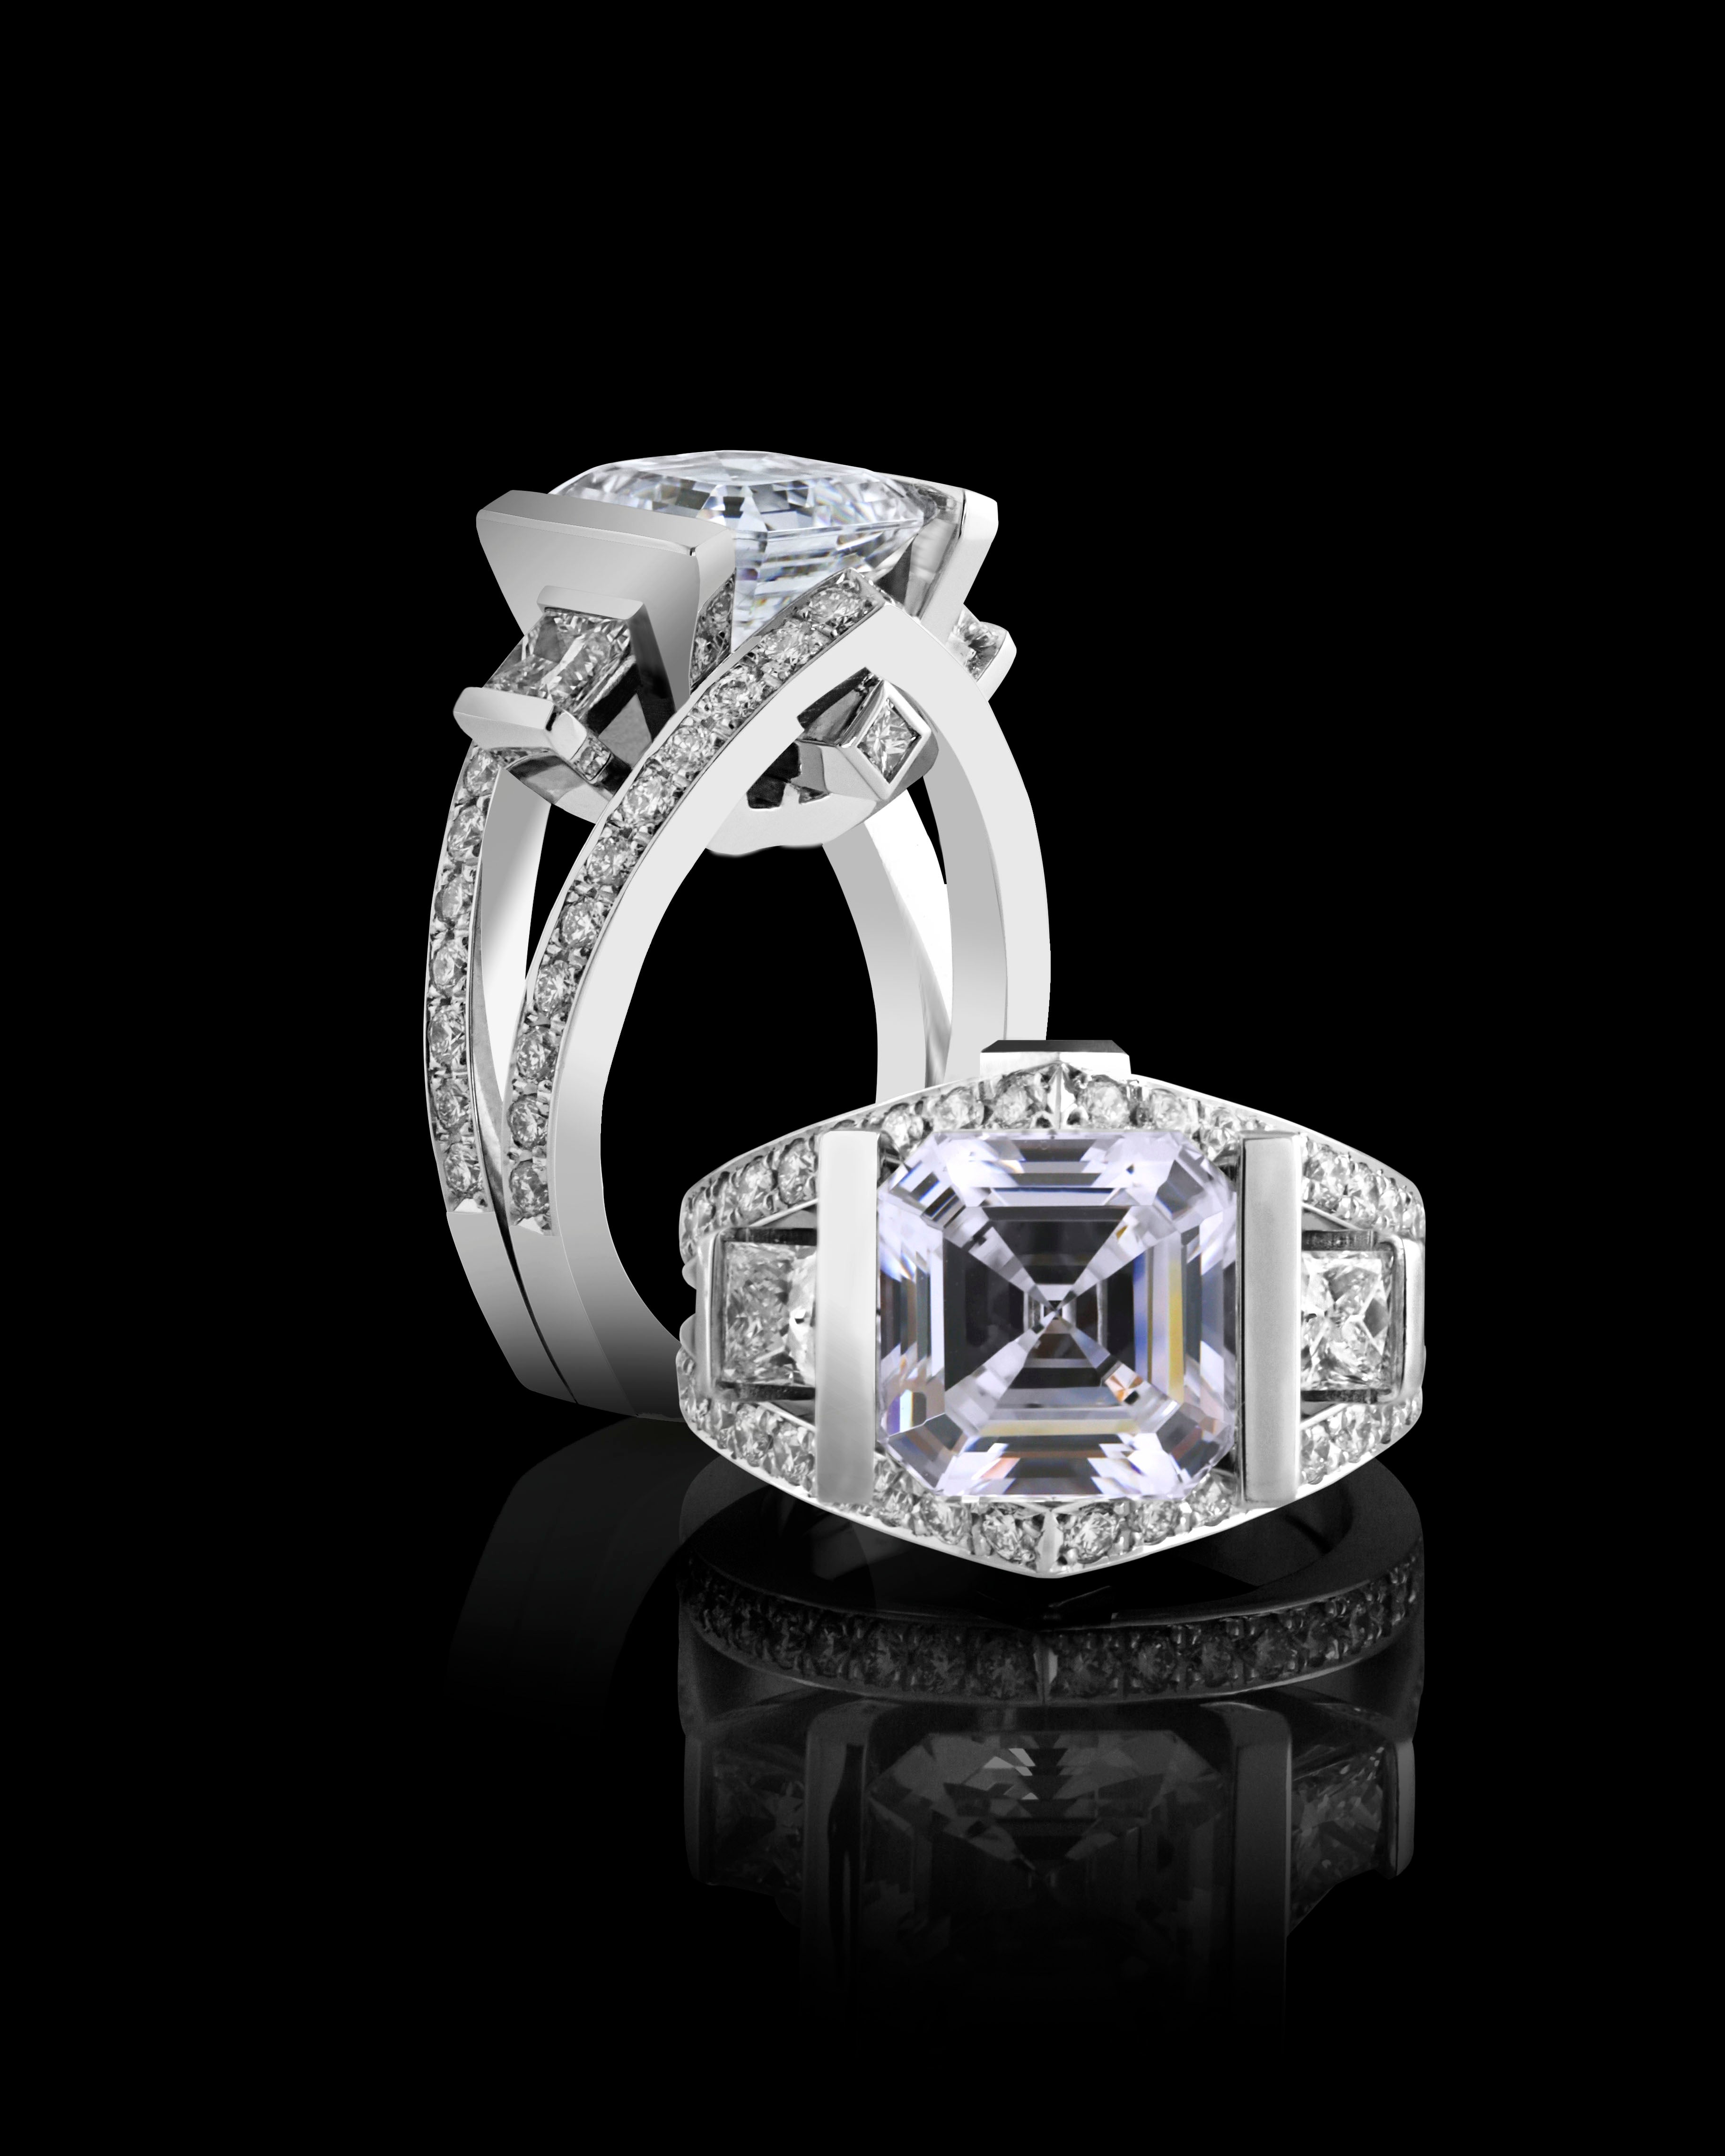 An elegant ring featuring a central square-cut diamond flanked by smaller stones on a reflective surface against a black background.